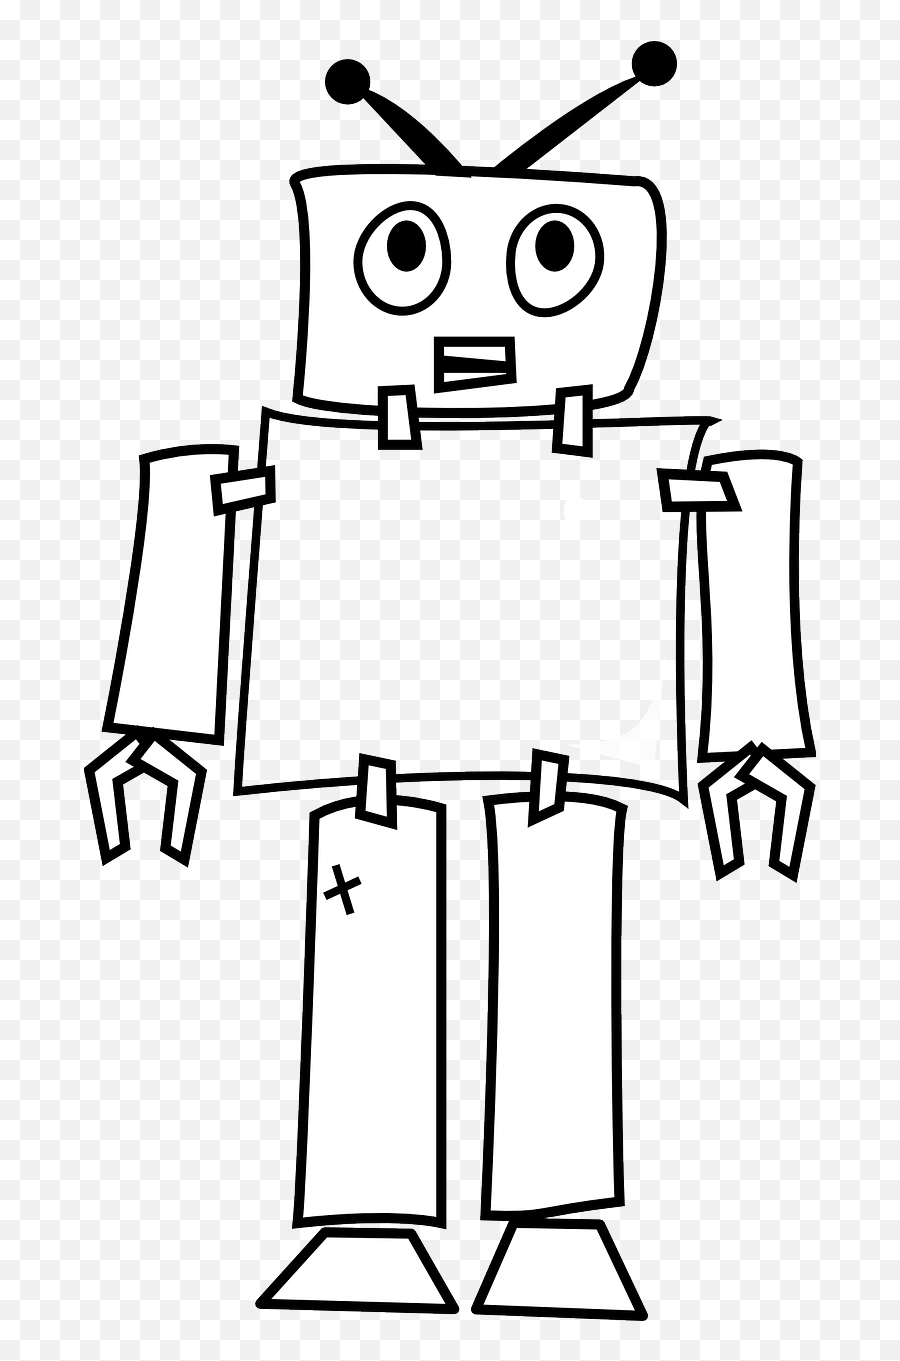 Android Robot Artificial Intelligence - Clip Art Black And White Robot Emoji,Butterfly Emoji Android